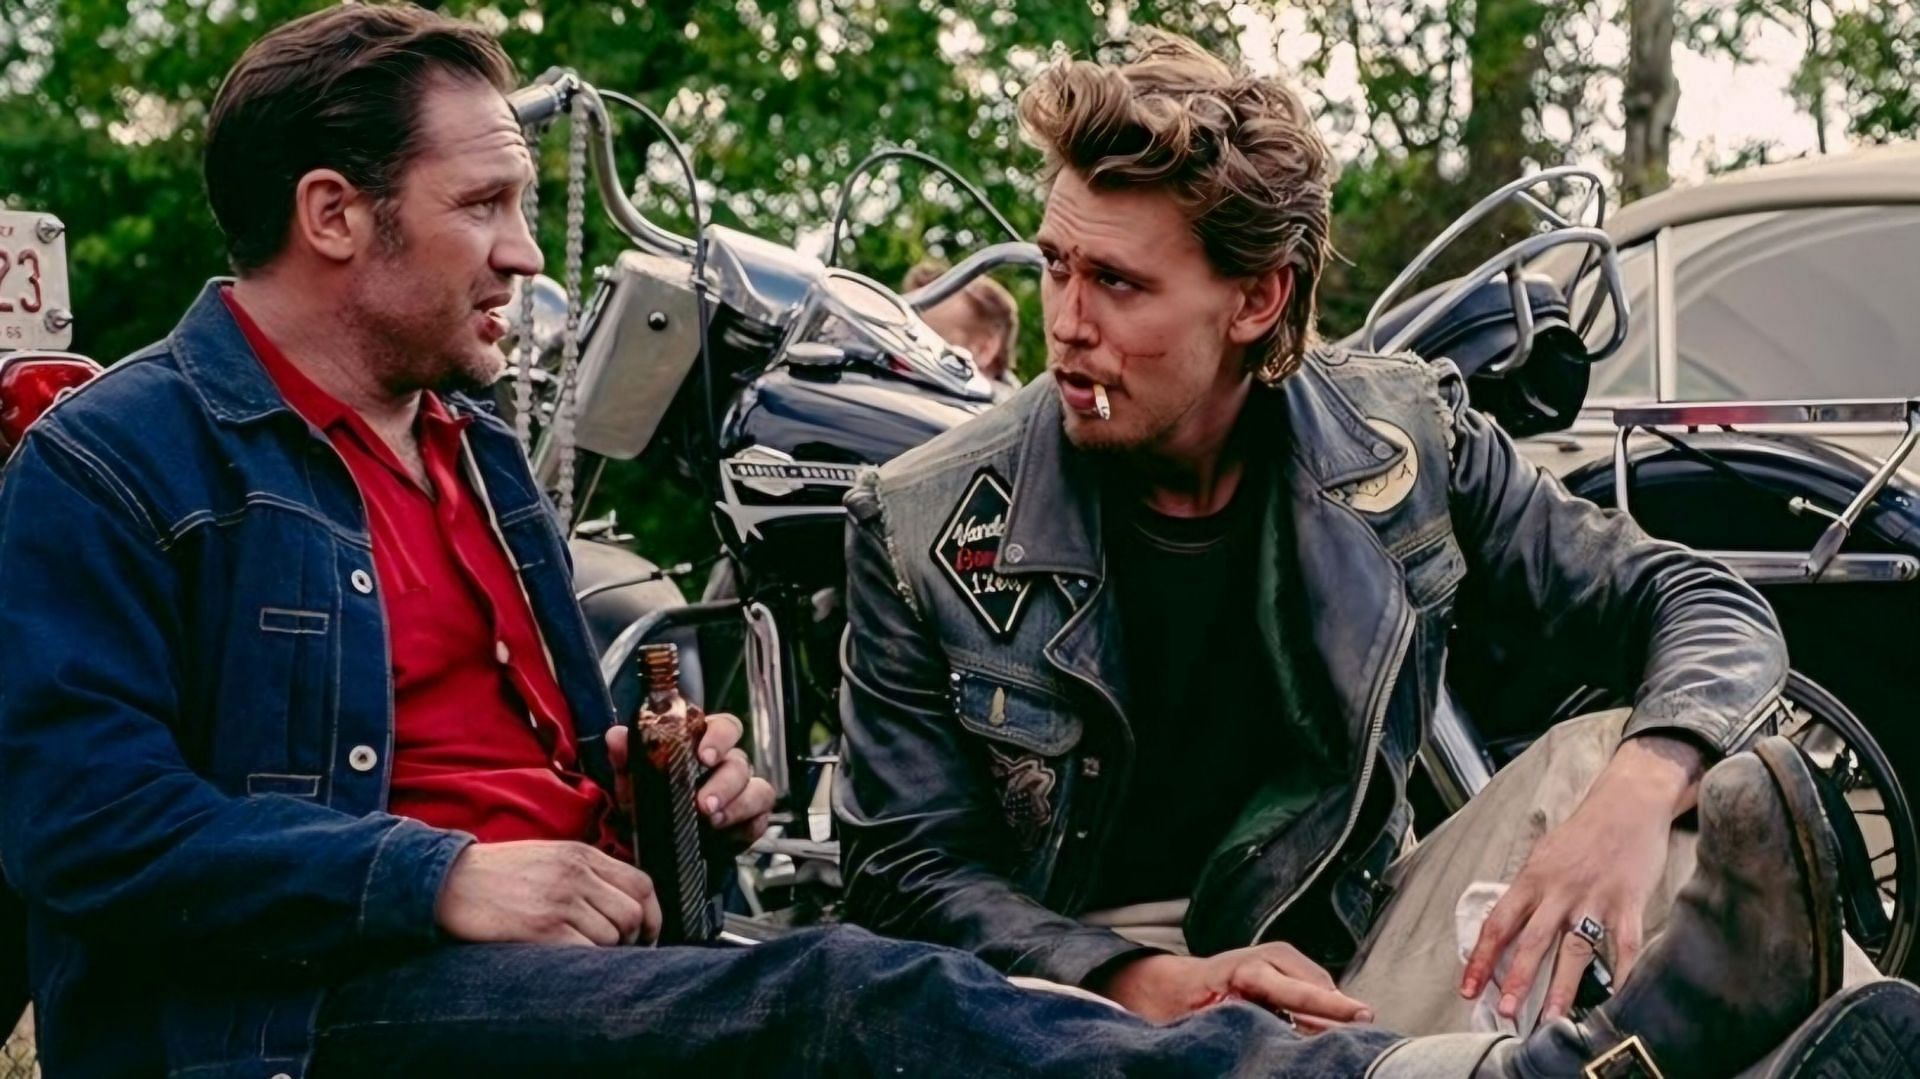 Austin Butler and Tom Hardy in The Bikeriders (Image via Focus Features)